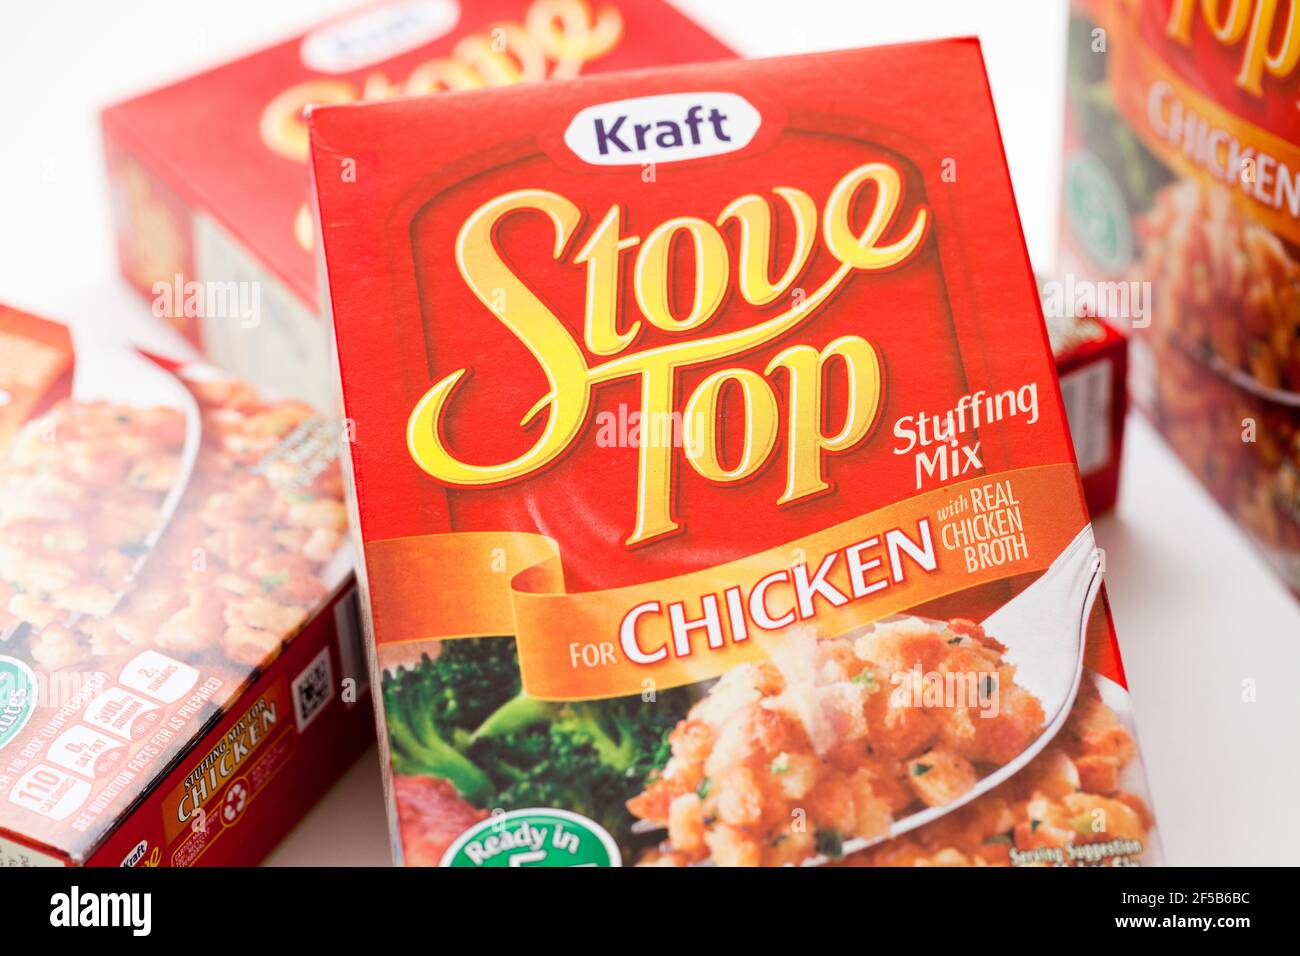 Chicken flavored Kraft Stove Top Stuffing Mix box front Stock Photo